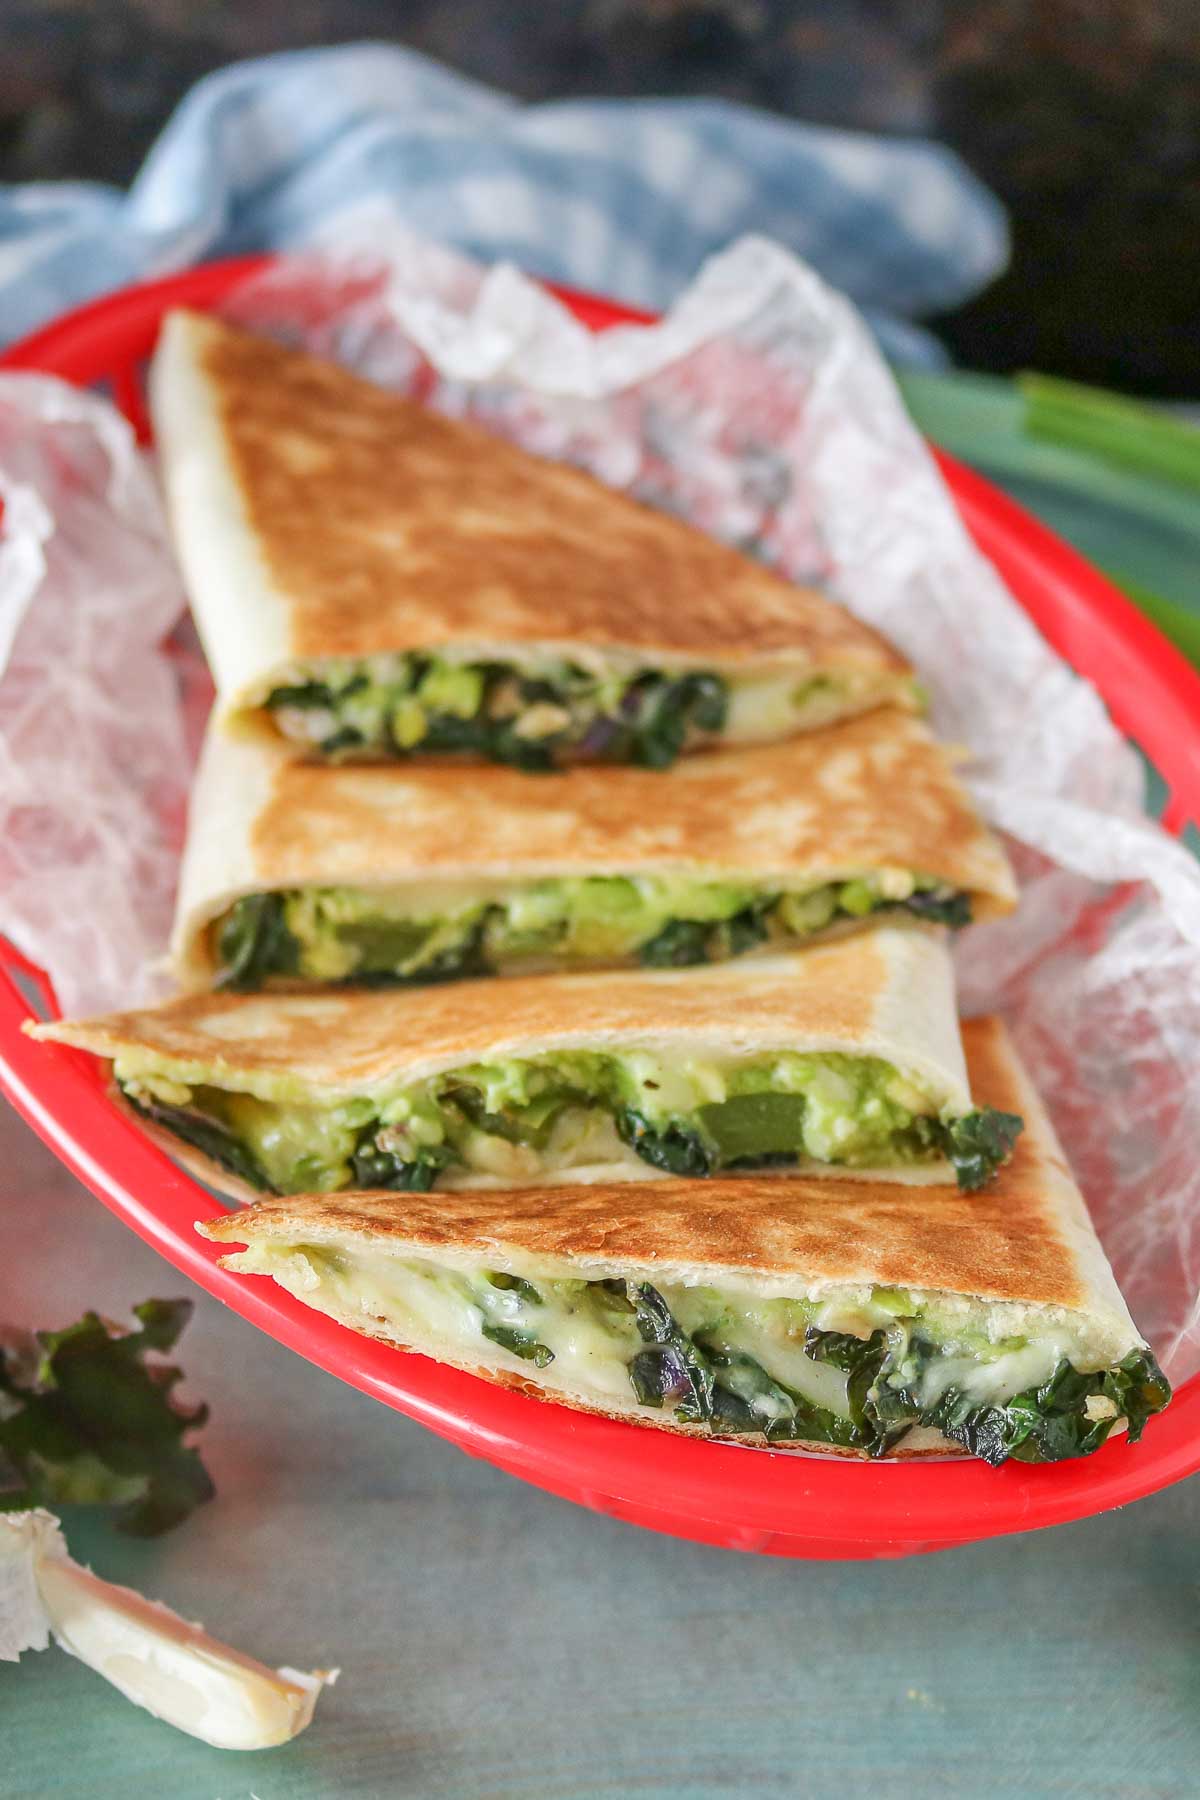 Avocado and veggie quesadillas in a wax paper-lined red basket.